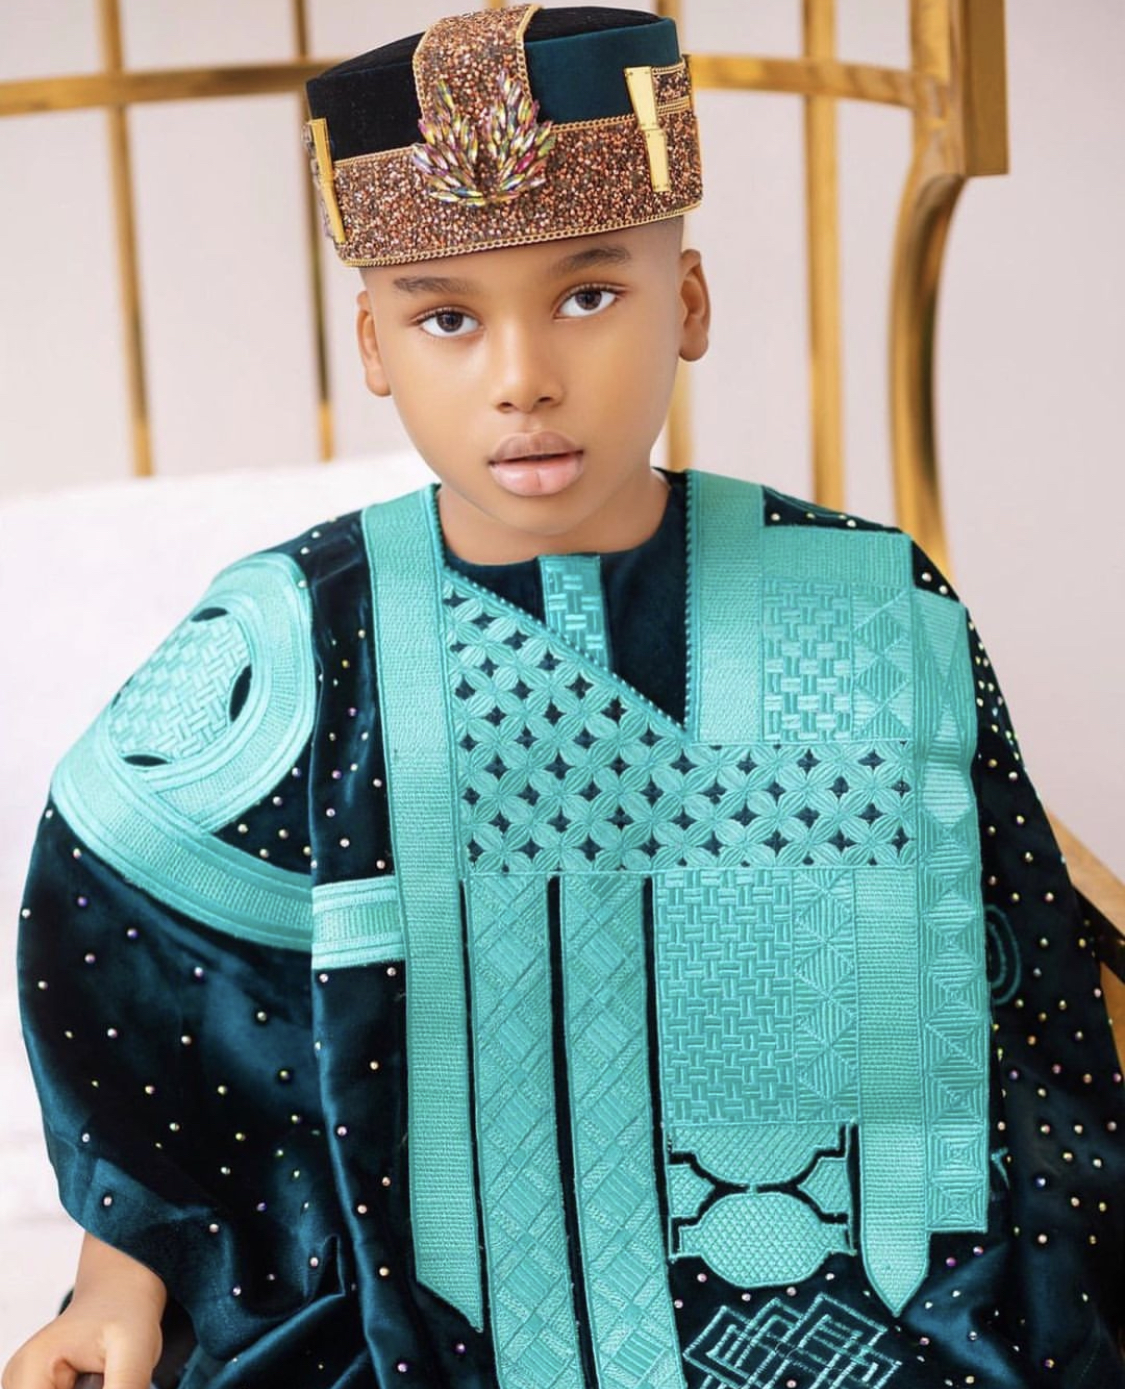 I miss you greatly and long to see you - Tonto Dikeh’s Ex Churchill pens tribute to son on birthday [photo]